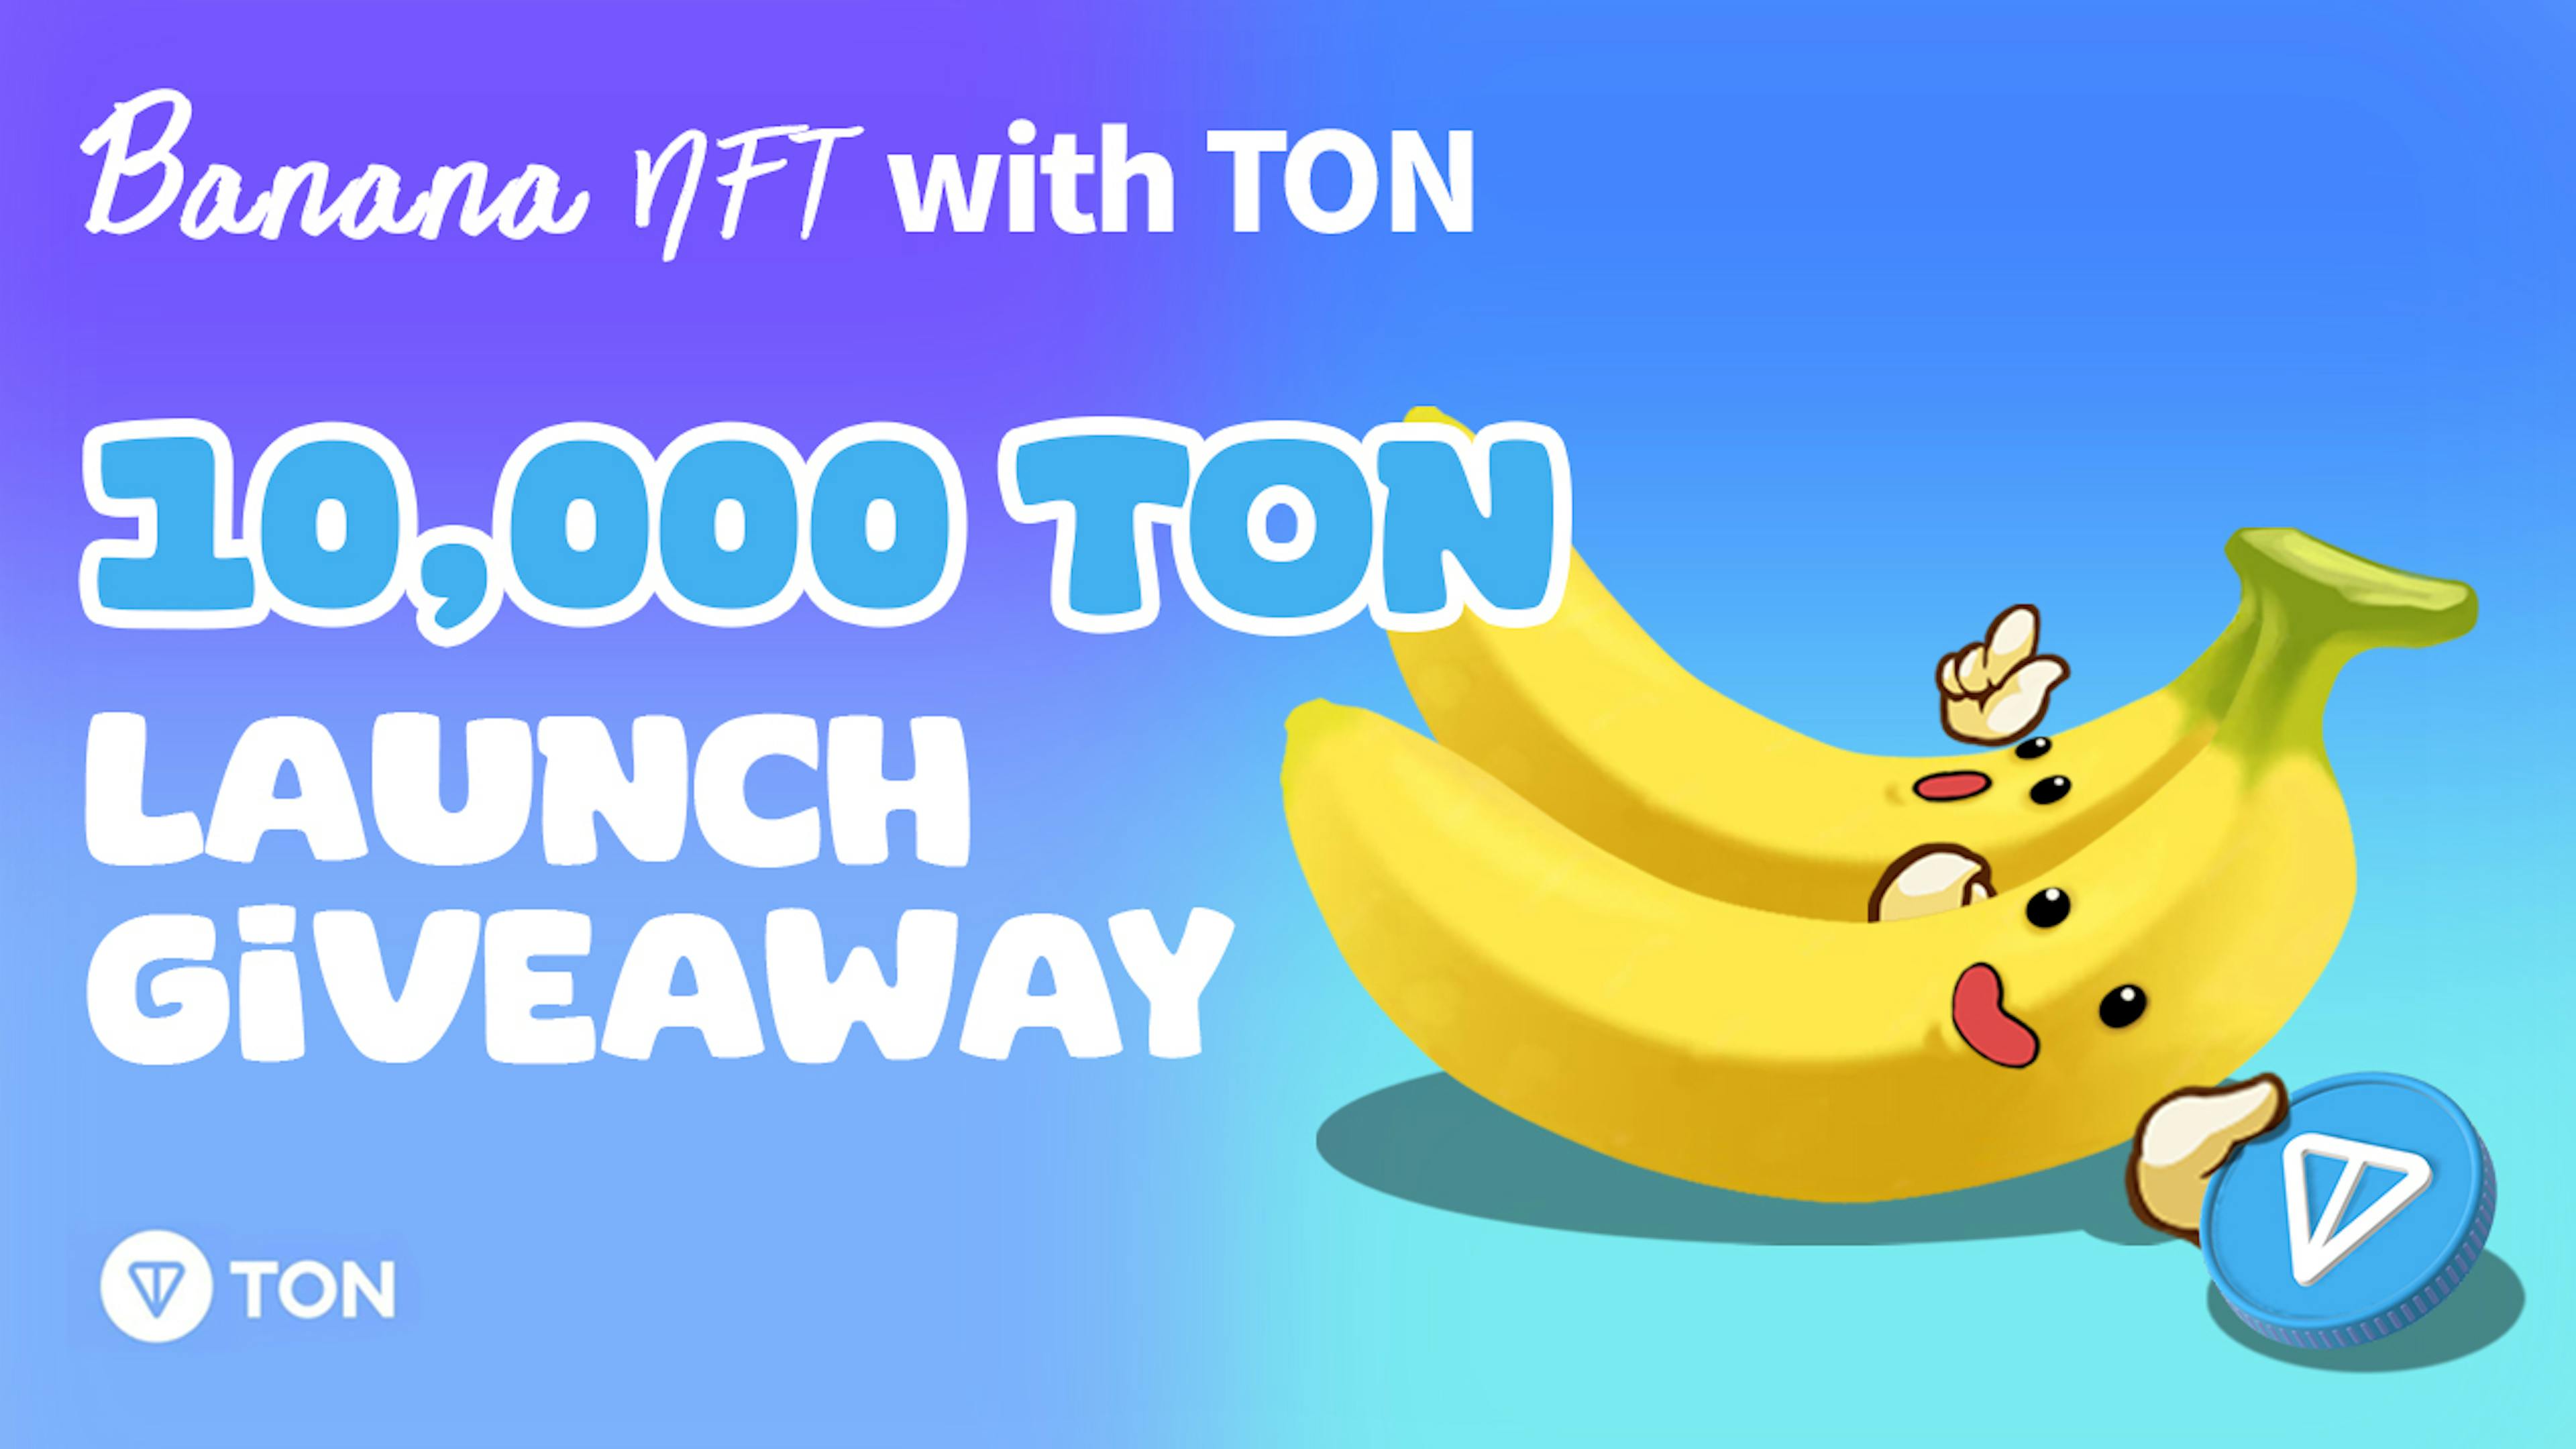 /banana-nft-launches-on-telegram-with-10000-$ton-giveaway-event feature image